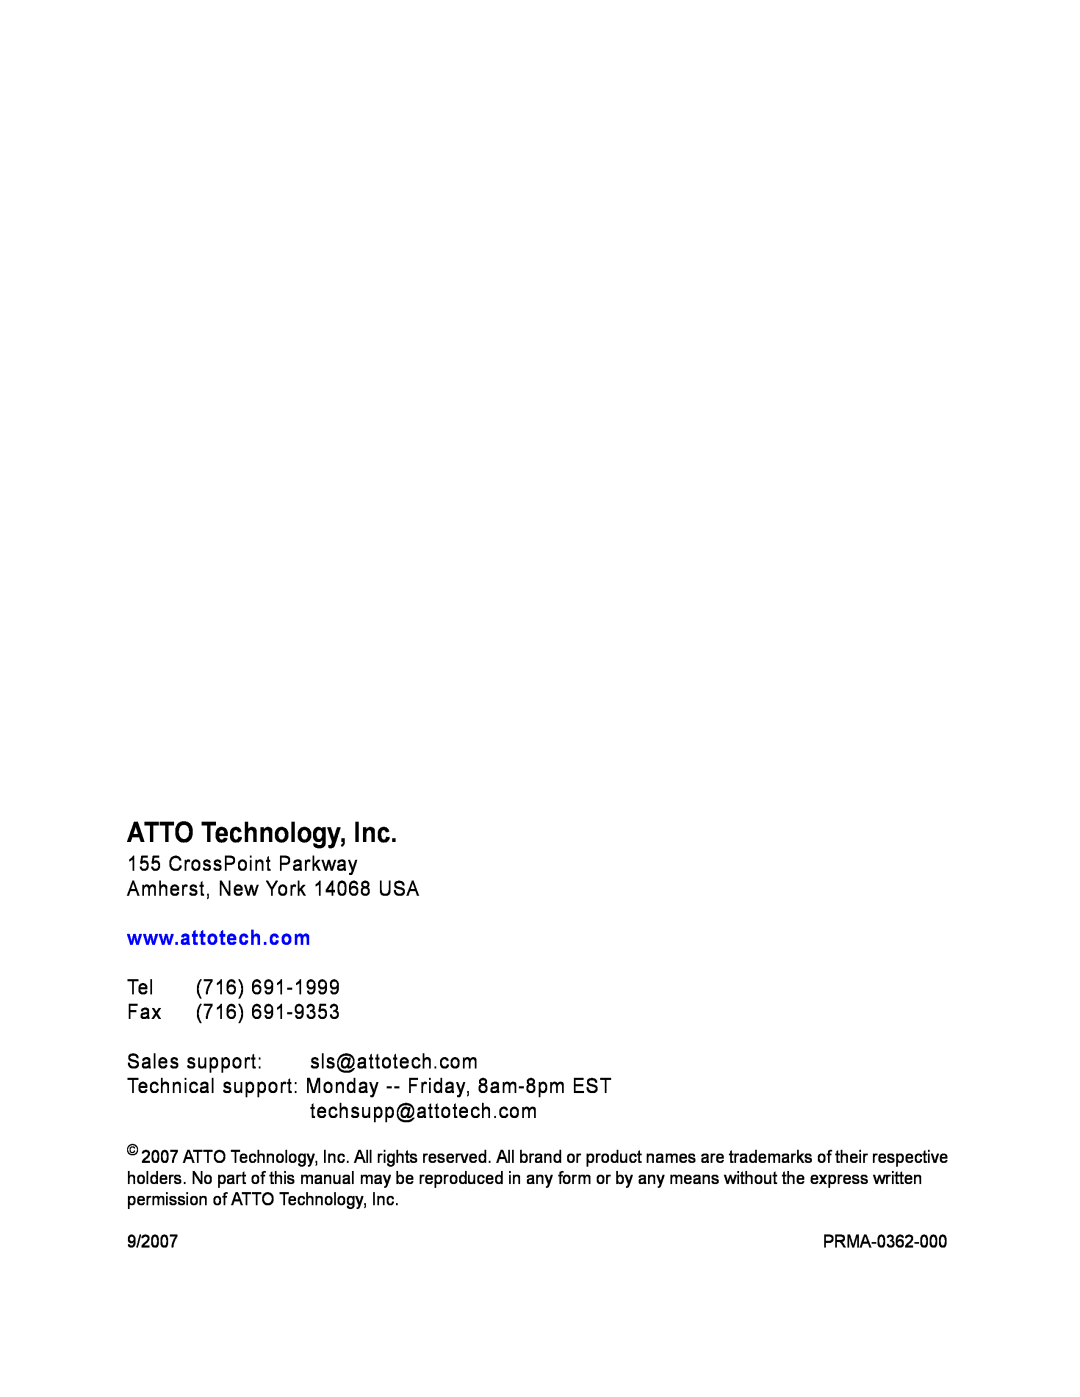 ATTO Technology 2400C/R/D, 2370E ATTO Technology, Inc, CrossPoint Parkway Amherst, New York 14068 USA, Sales support 